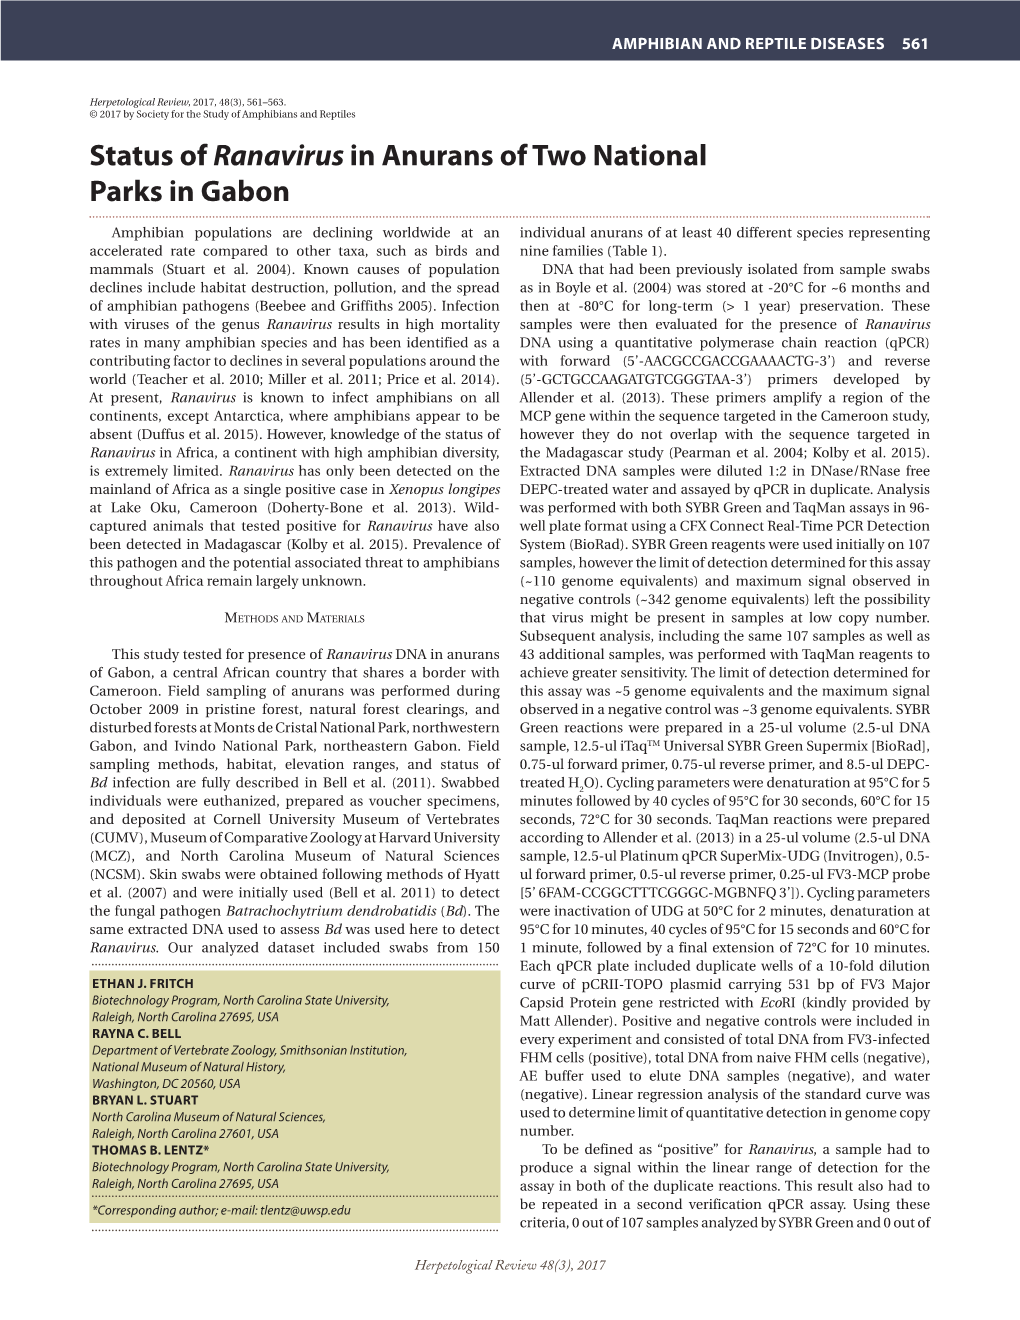 Status of Ranavirus in Anurans of Two National Parks in Gabon